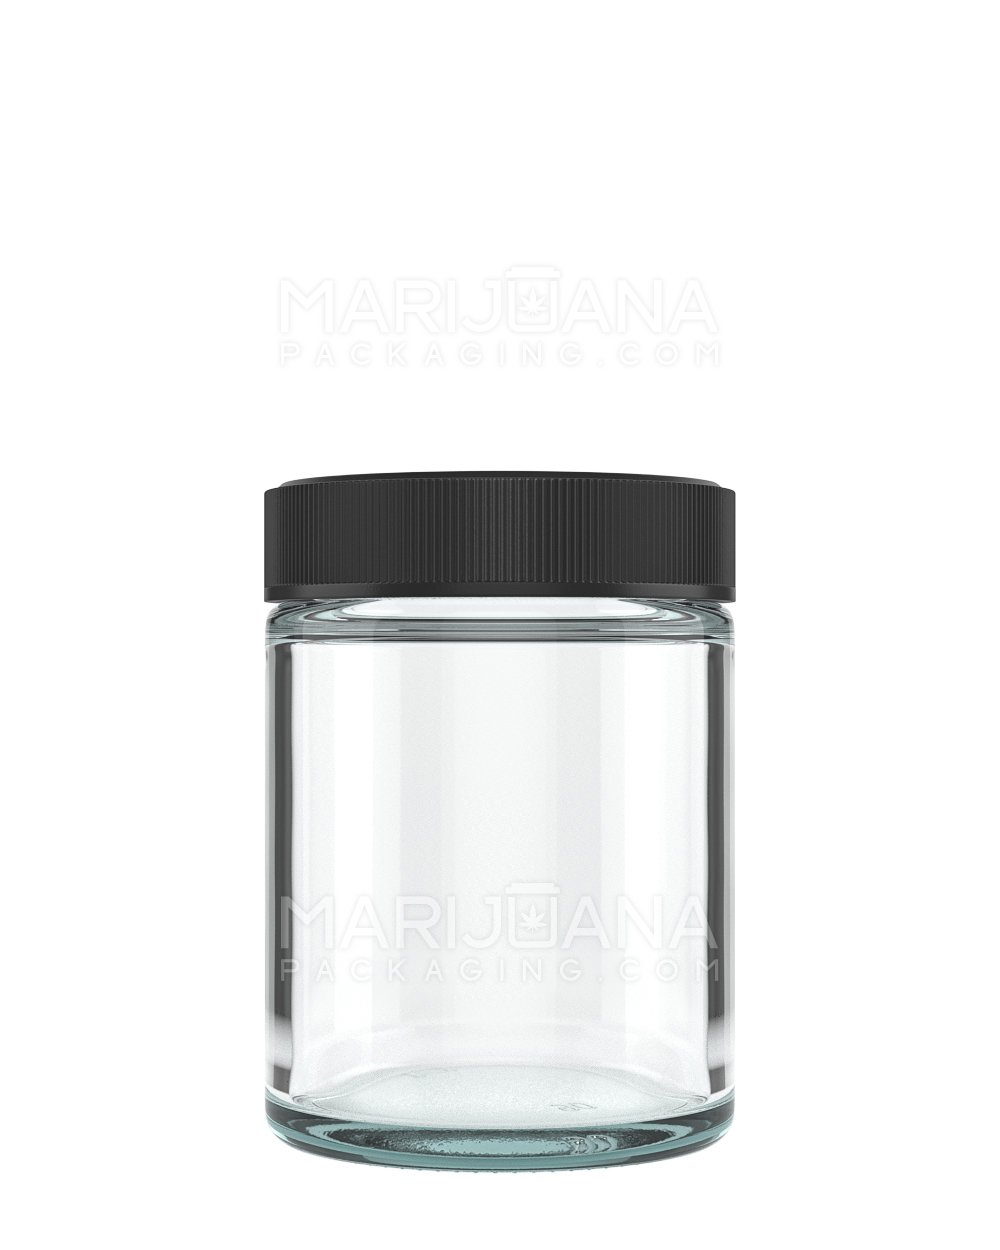 Straight Sided Clear Glass Jars with Black Cap | 53mm - 4oz - 120 Count - 1